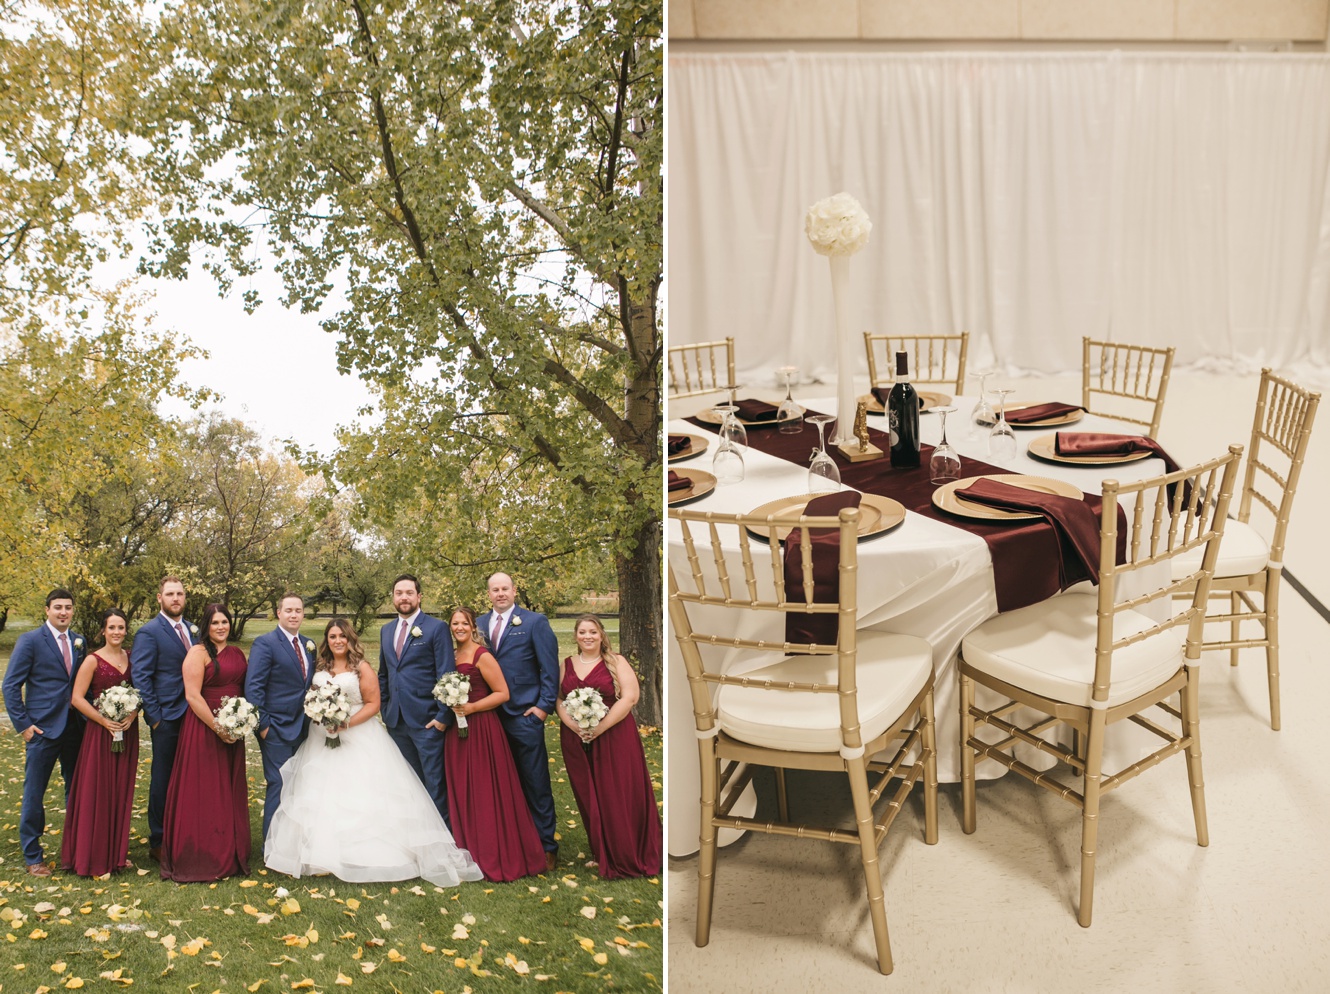 Classic Fall Wedding in September